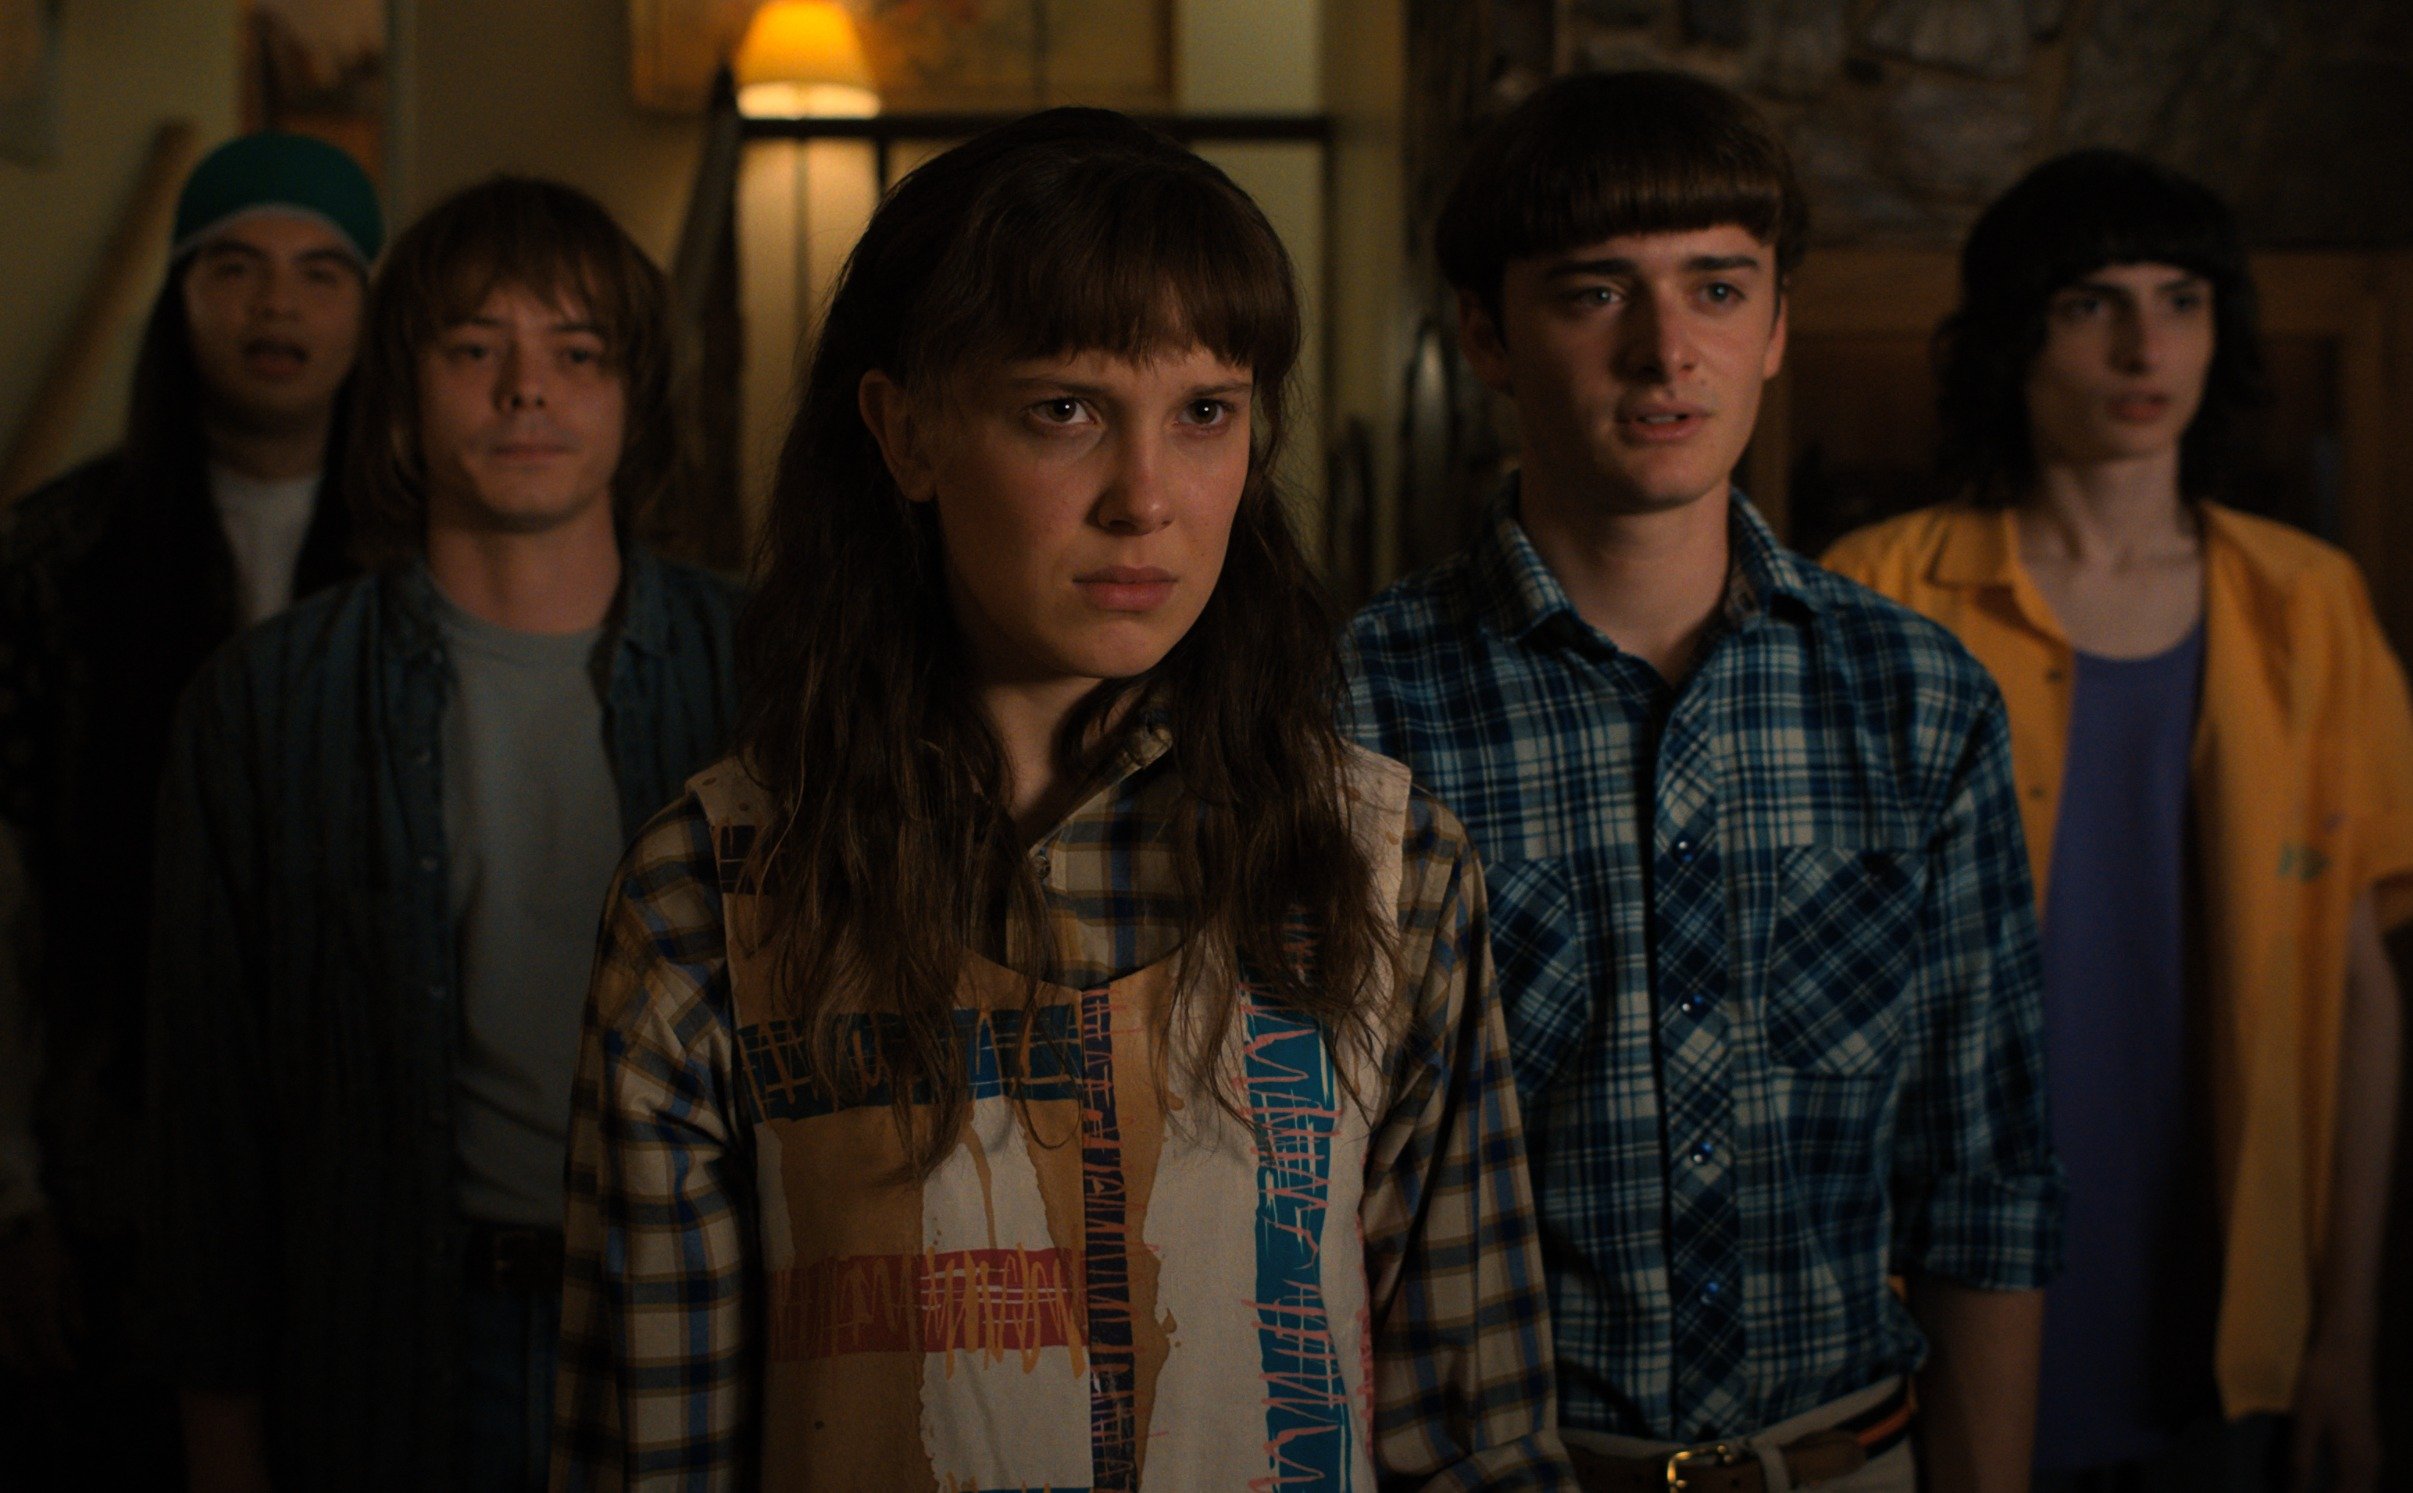 Eduardo Franco, Charlie Heaton, Millie Bobby Brown, Noah Schnapp, Finn Wolfhard in 'Stranger Things 4.' whiich set its part 2 release date for July. The group is standing in a dimly lit room and looking skeptically at someone or something off-screen.